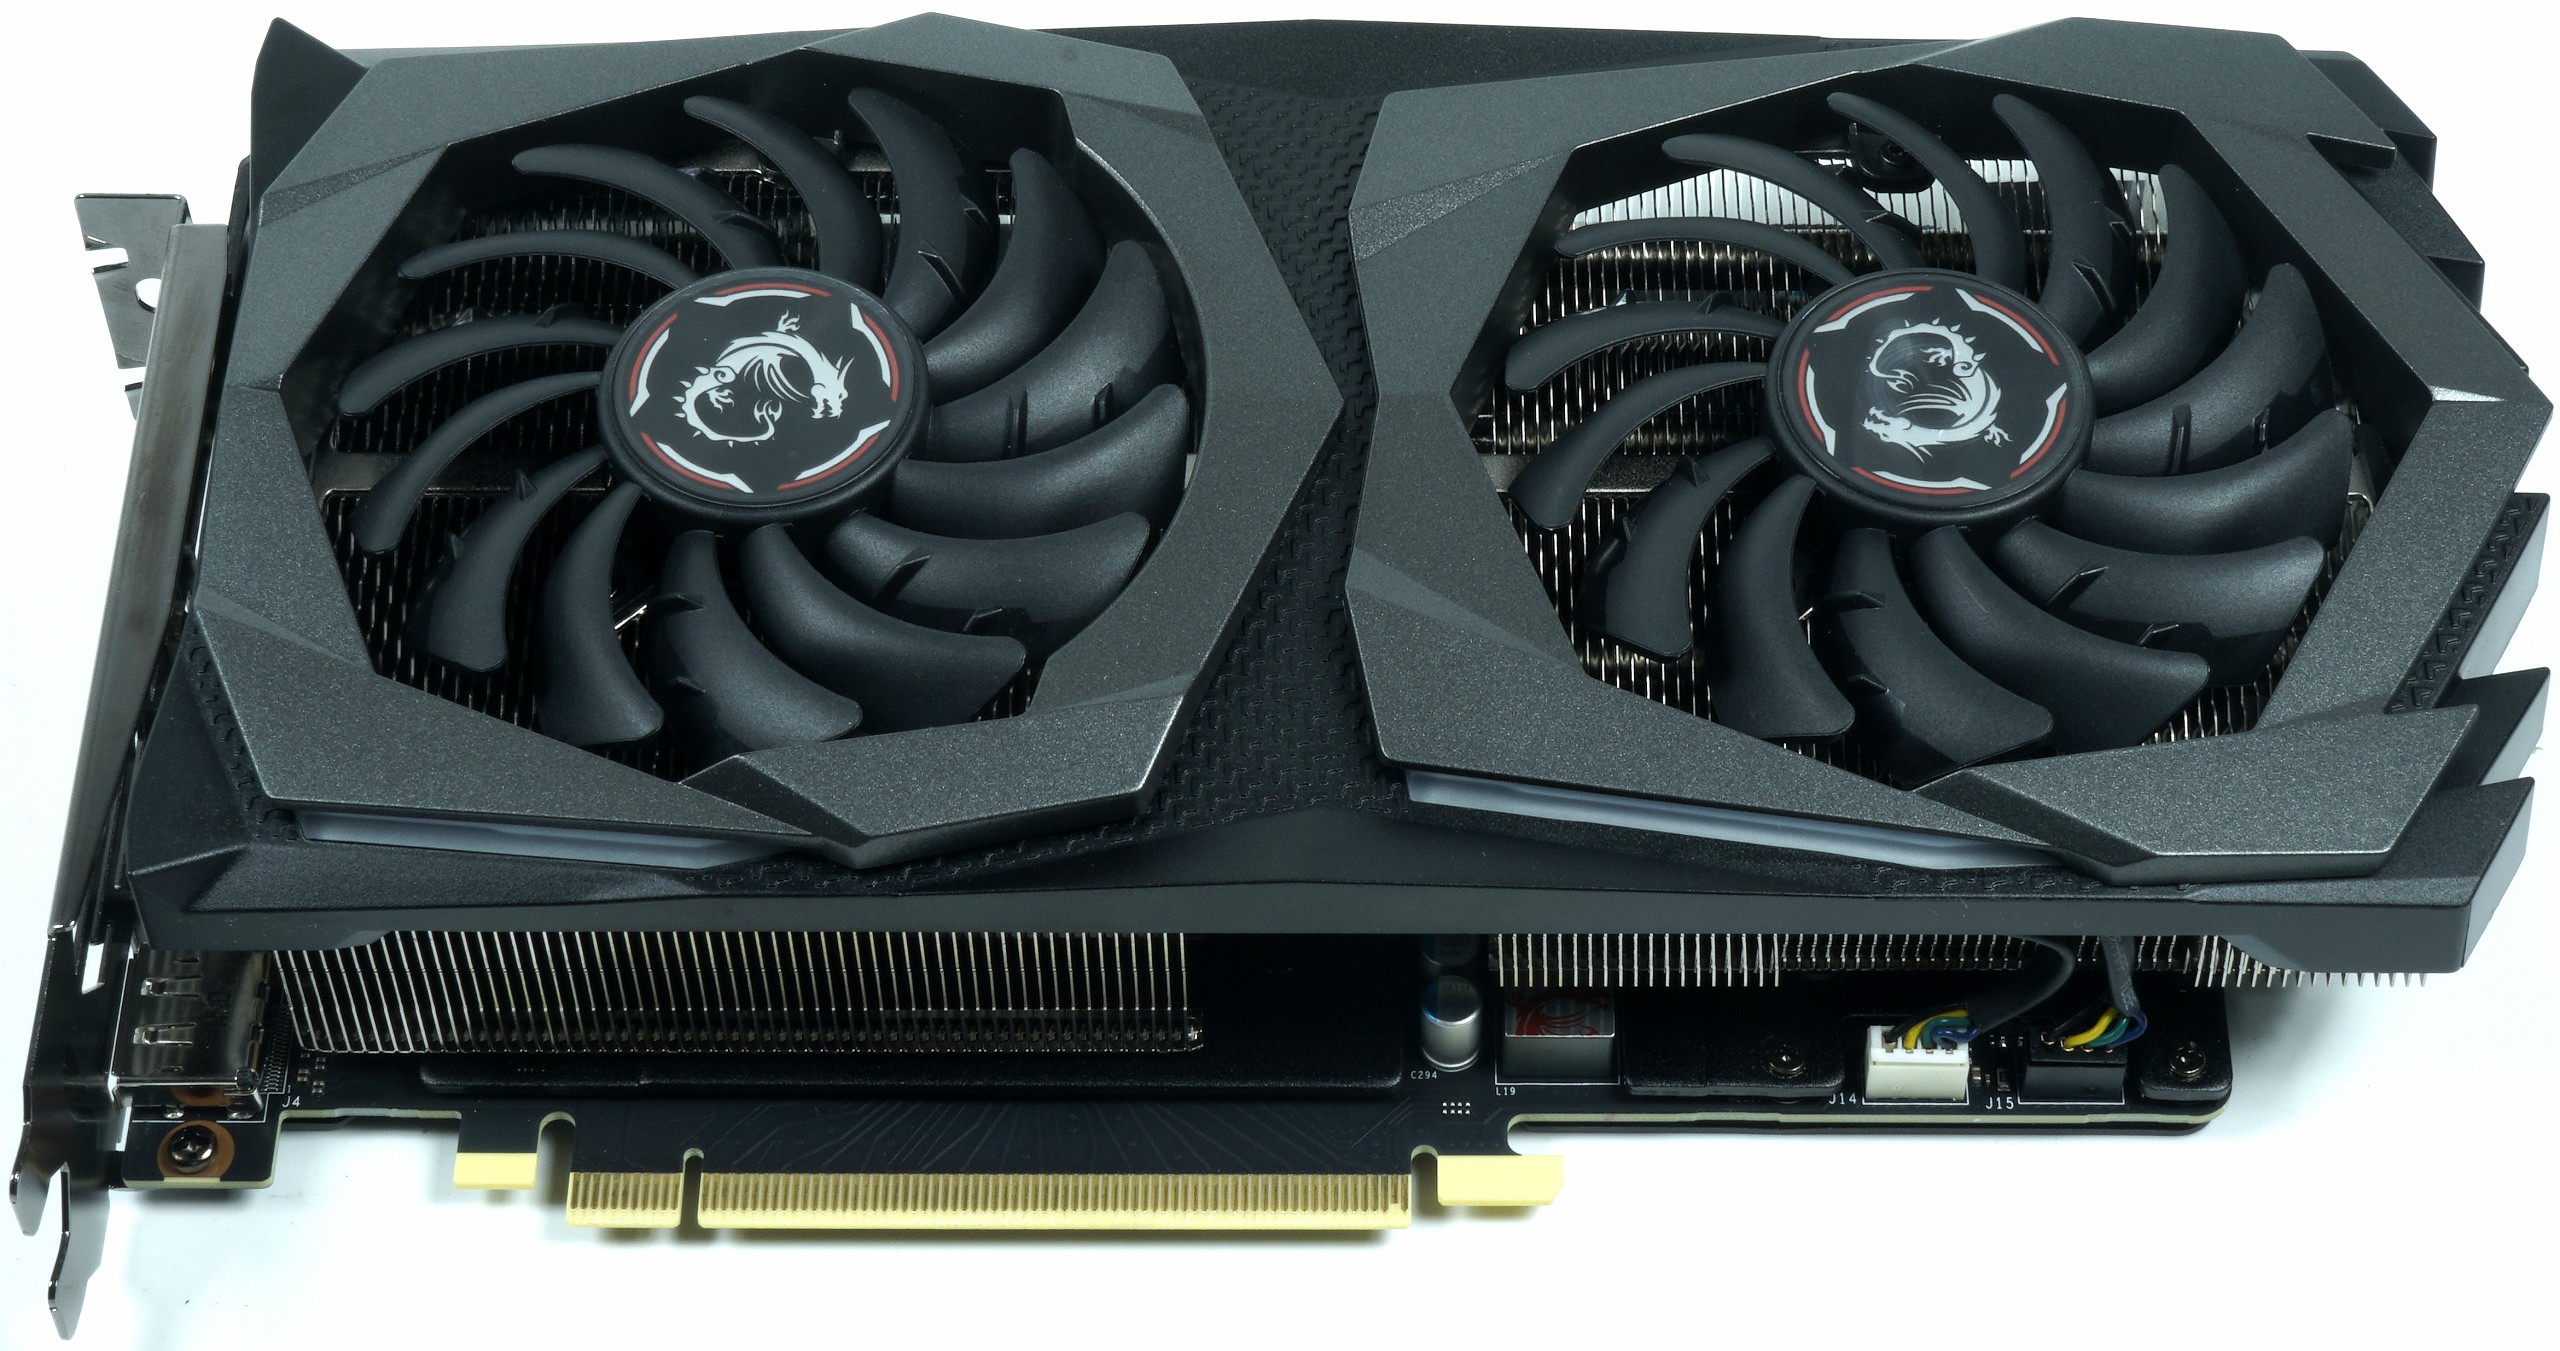 Prevented cannibal: MSI RTX 2060 Super Gaming X in review - quiet and cool